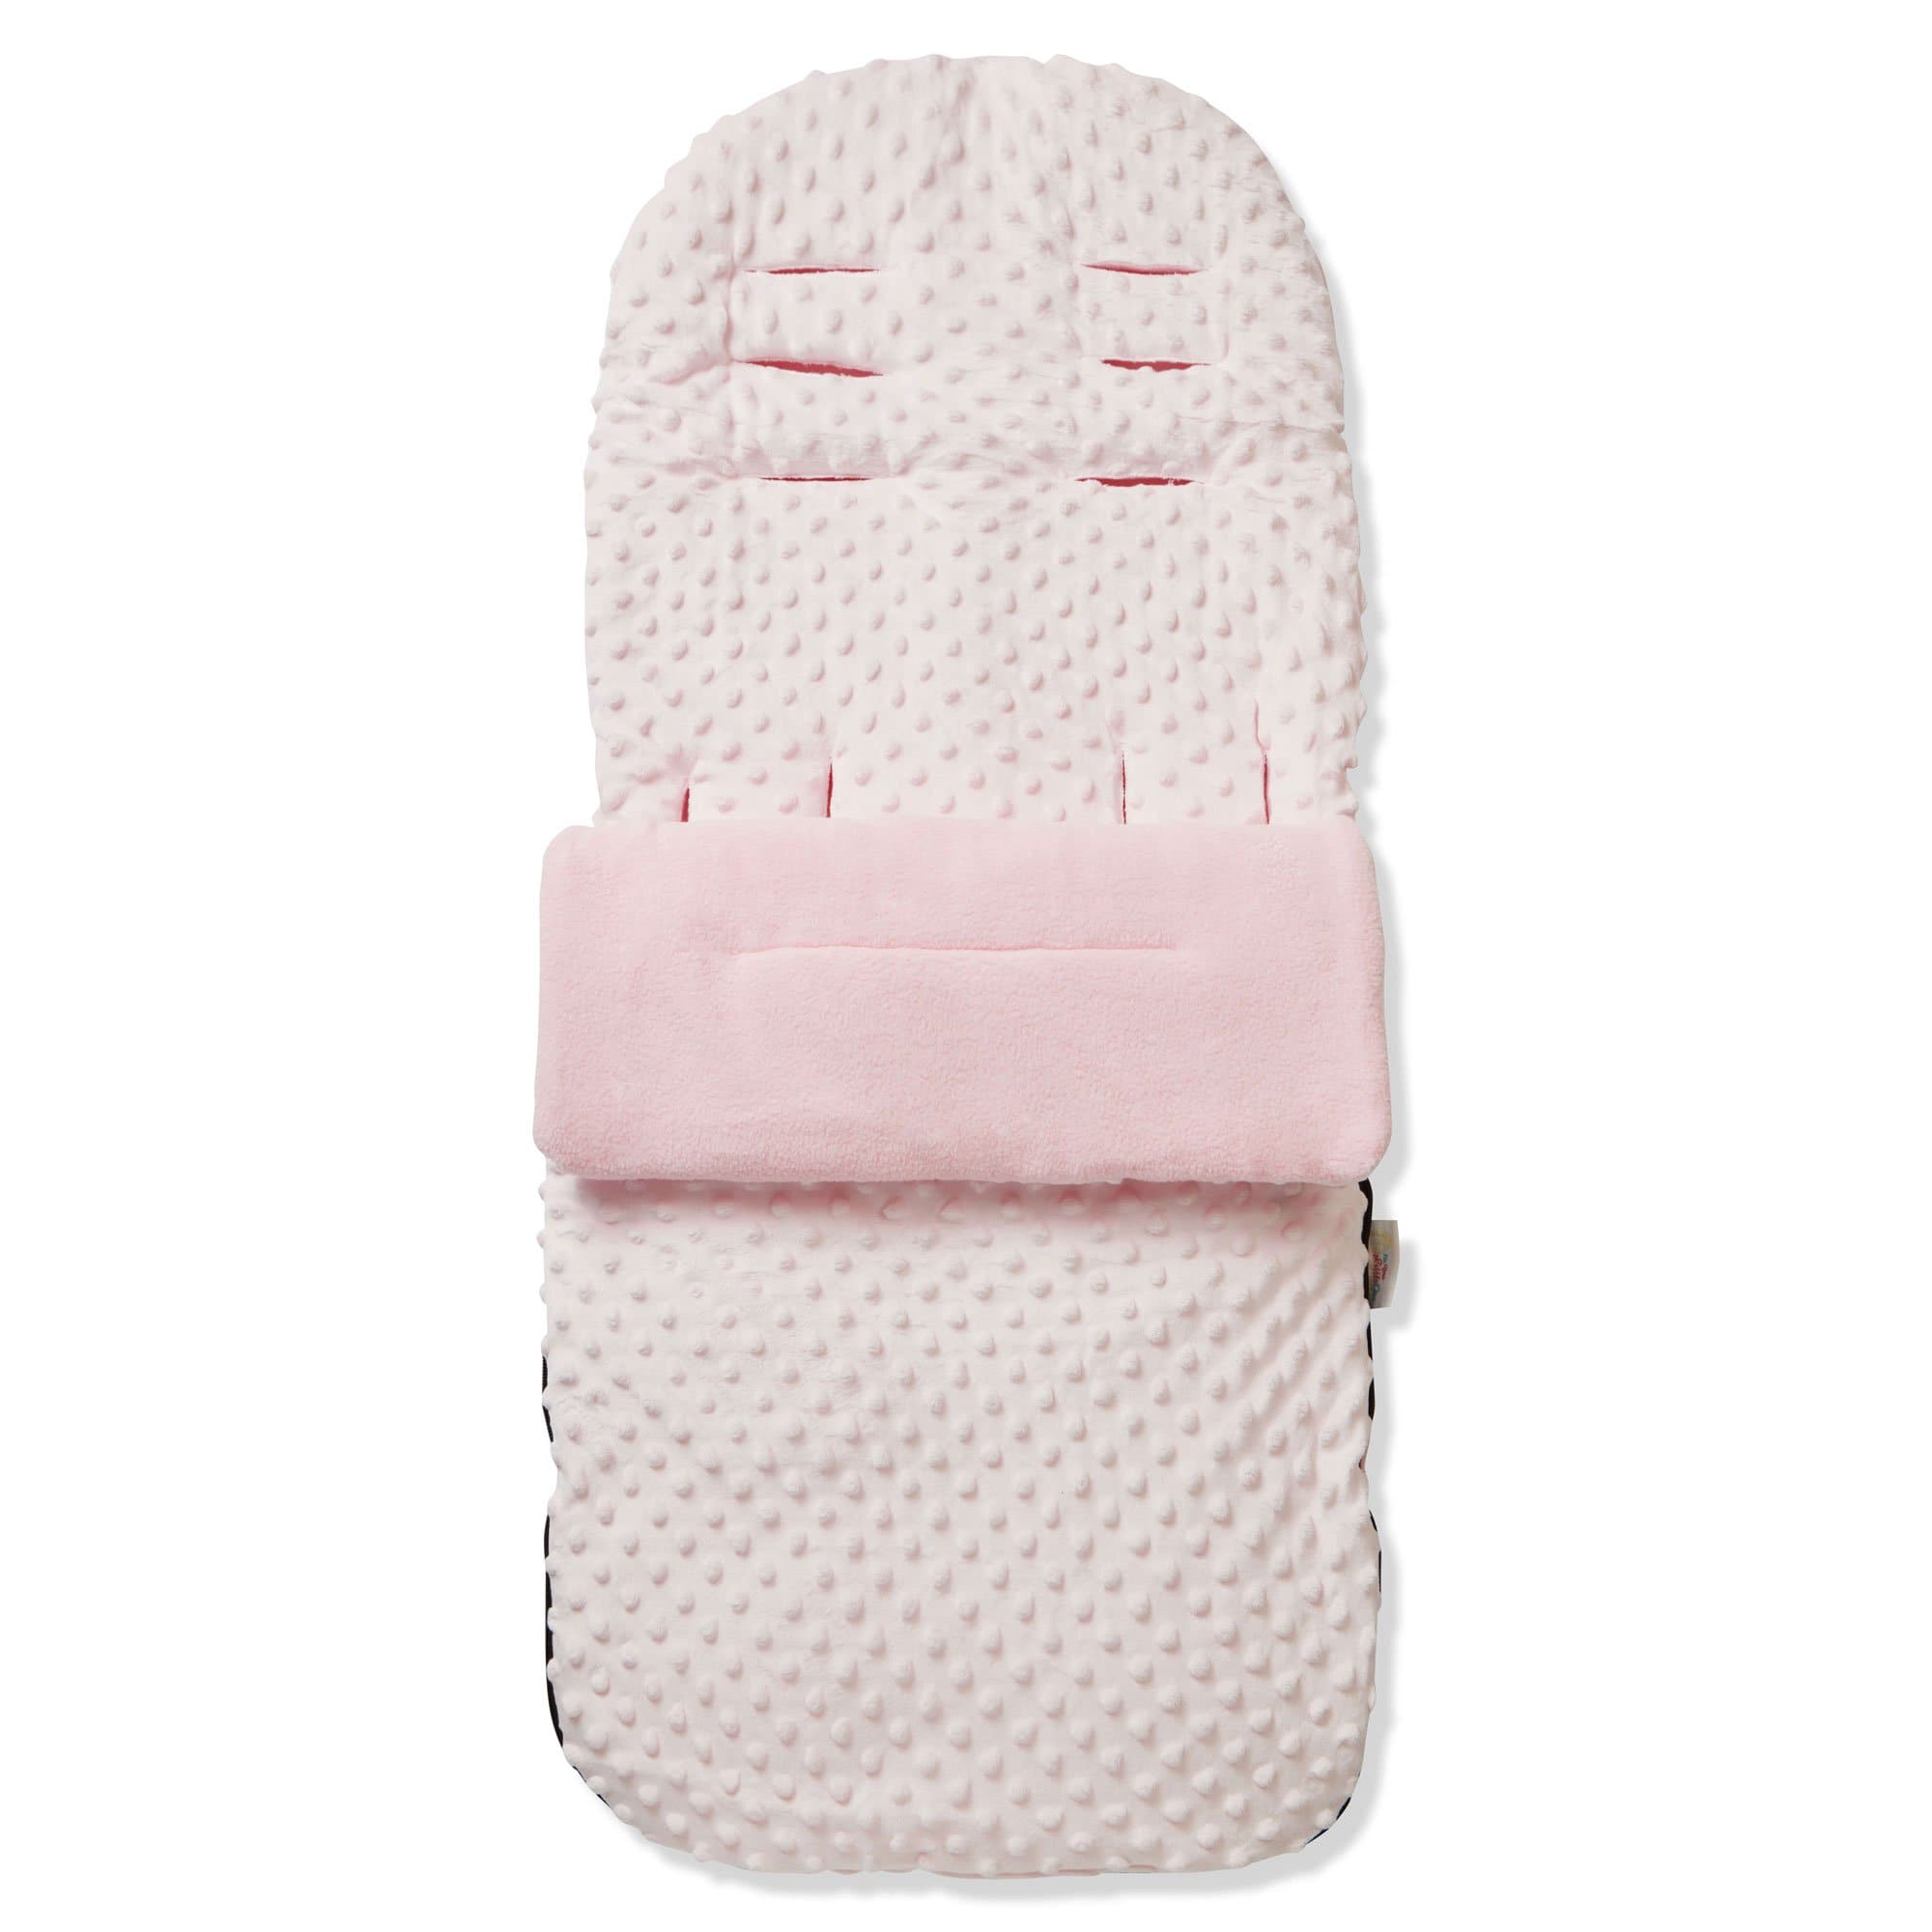 Dimple Footmuff / Cosy Toes Compatible with Babywelt - Pink / Fits All Models | For Your Little One